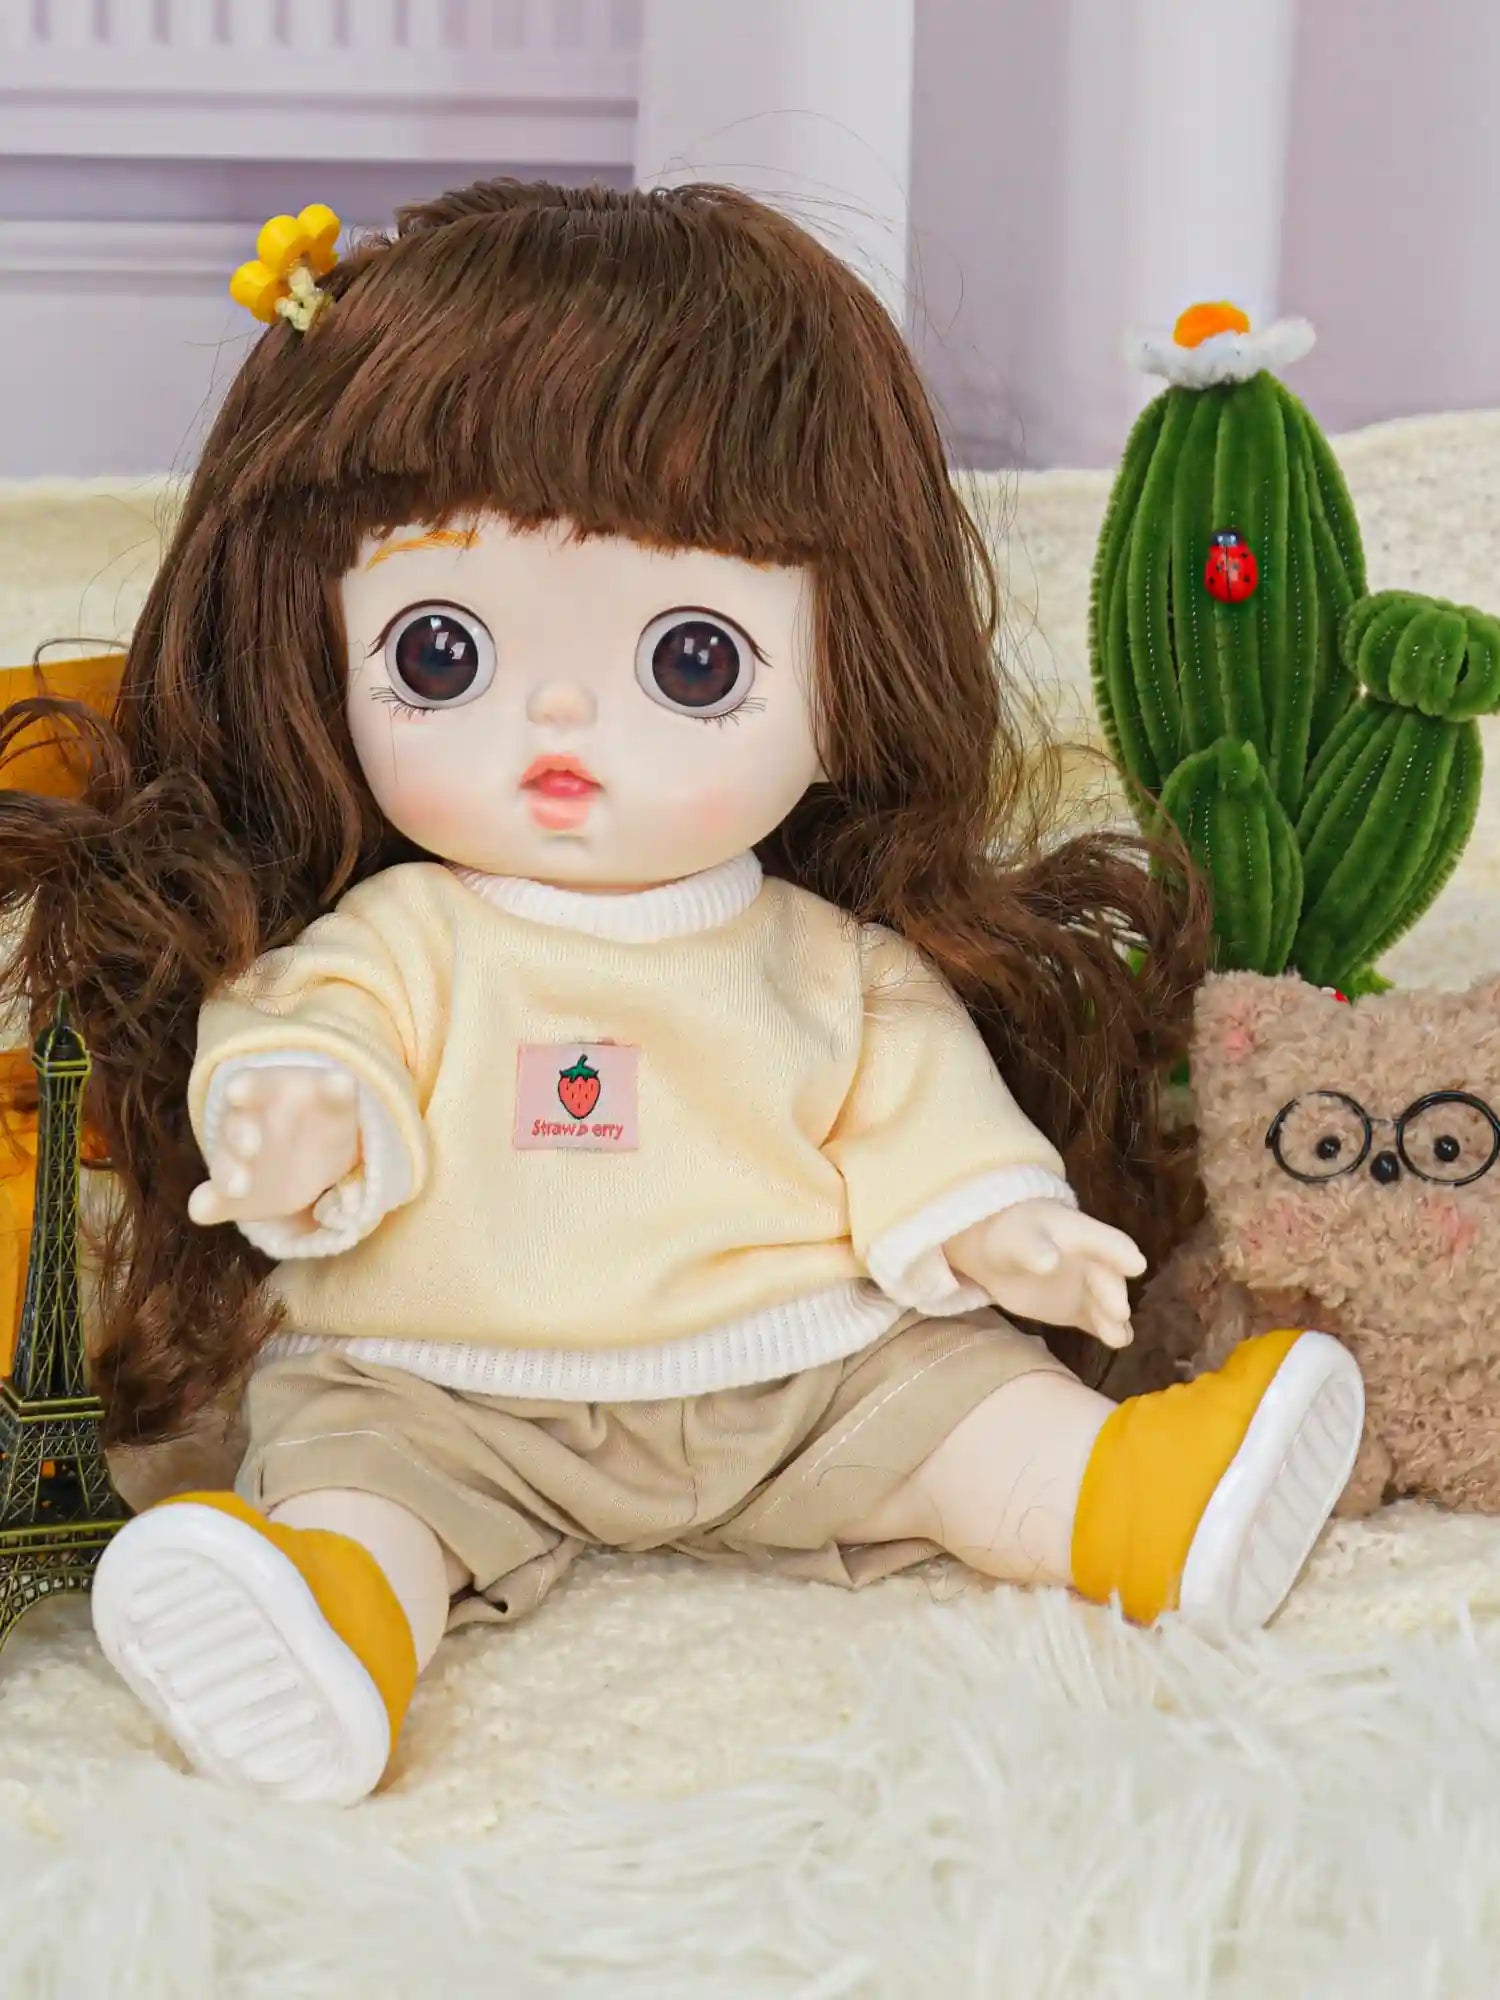 Adorable doll with brown eyes and a cute hairstyle, dressed in a cozy outfit, sharing a scene with a plush toy.